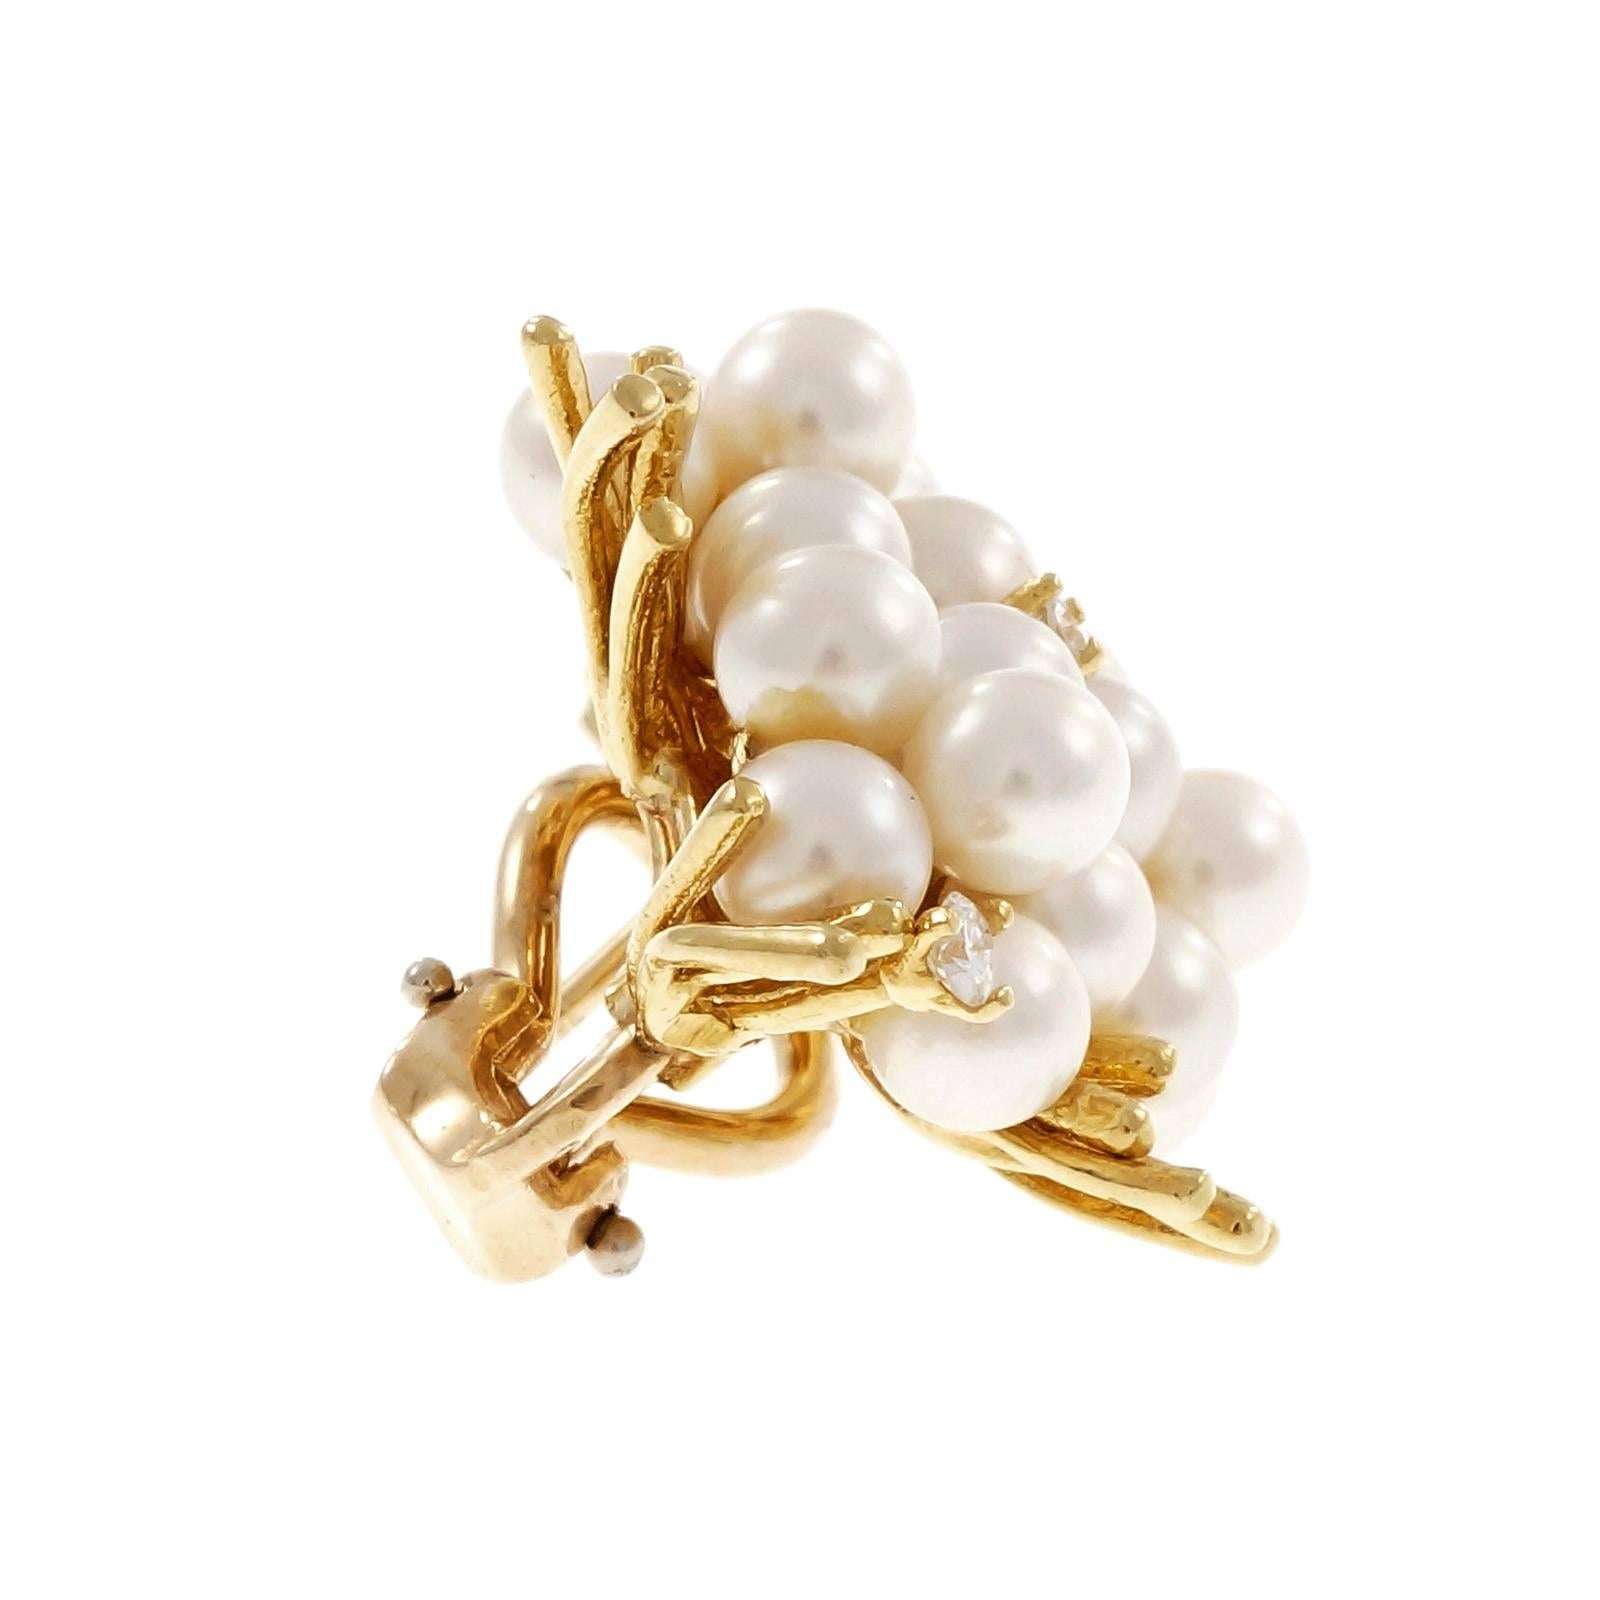 Pearl Diamond Spray Design clip post Earrings. 26 round Akoya pearls accented with 4 round cut diamonds in 18k yellow gold. Clip and pierced post for comfortable and secure wear. Circa 1960-1970.

26 round fine white Akoya cultured pearls, 4 –